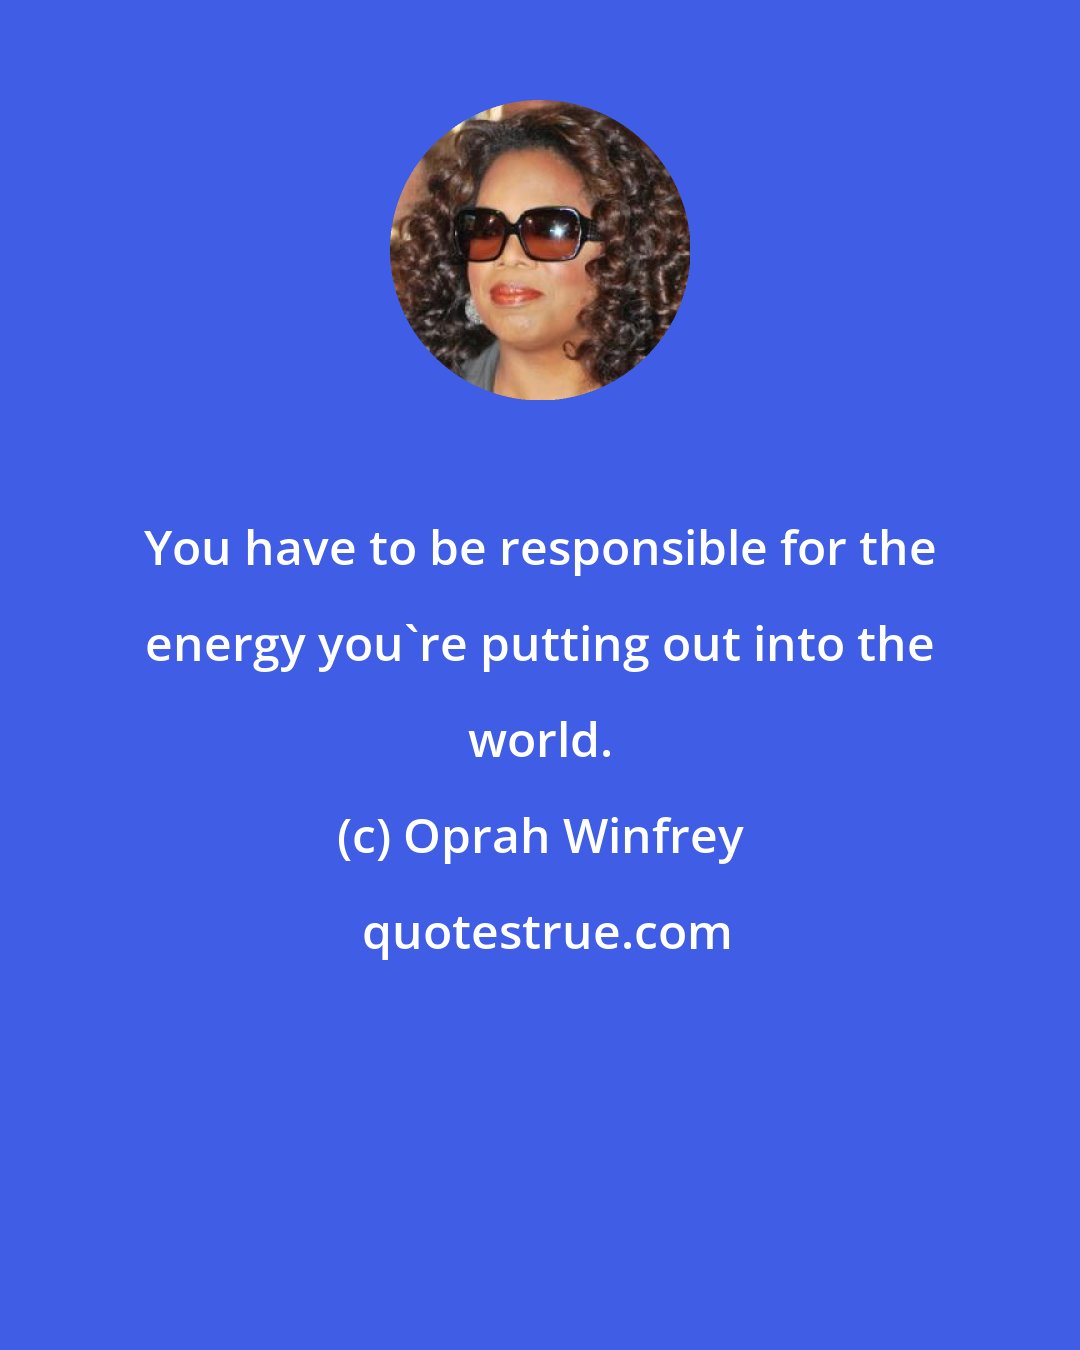 Oprah Winfrey: You have to be responsible for the energy you're putting out into the world.